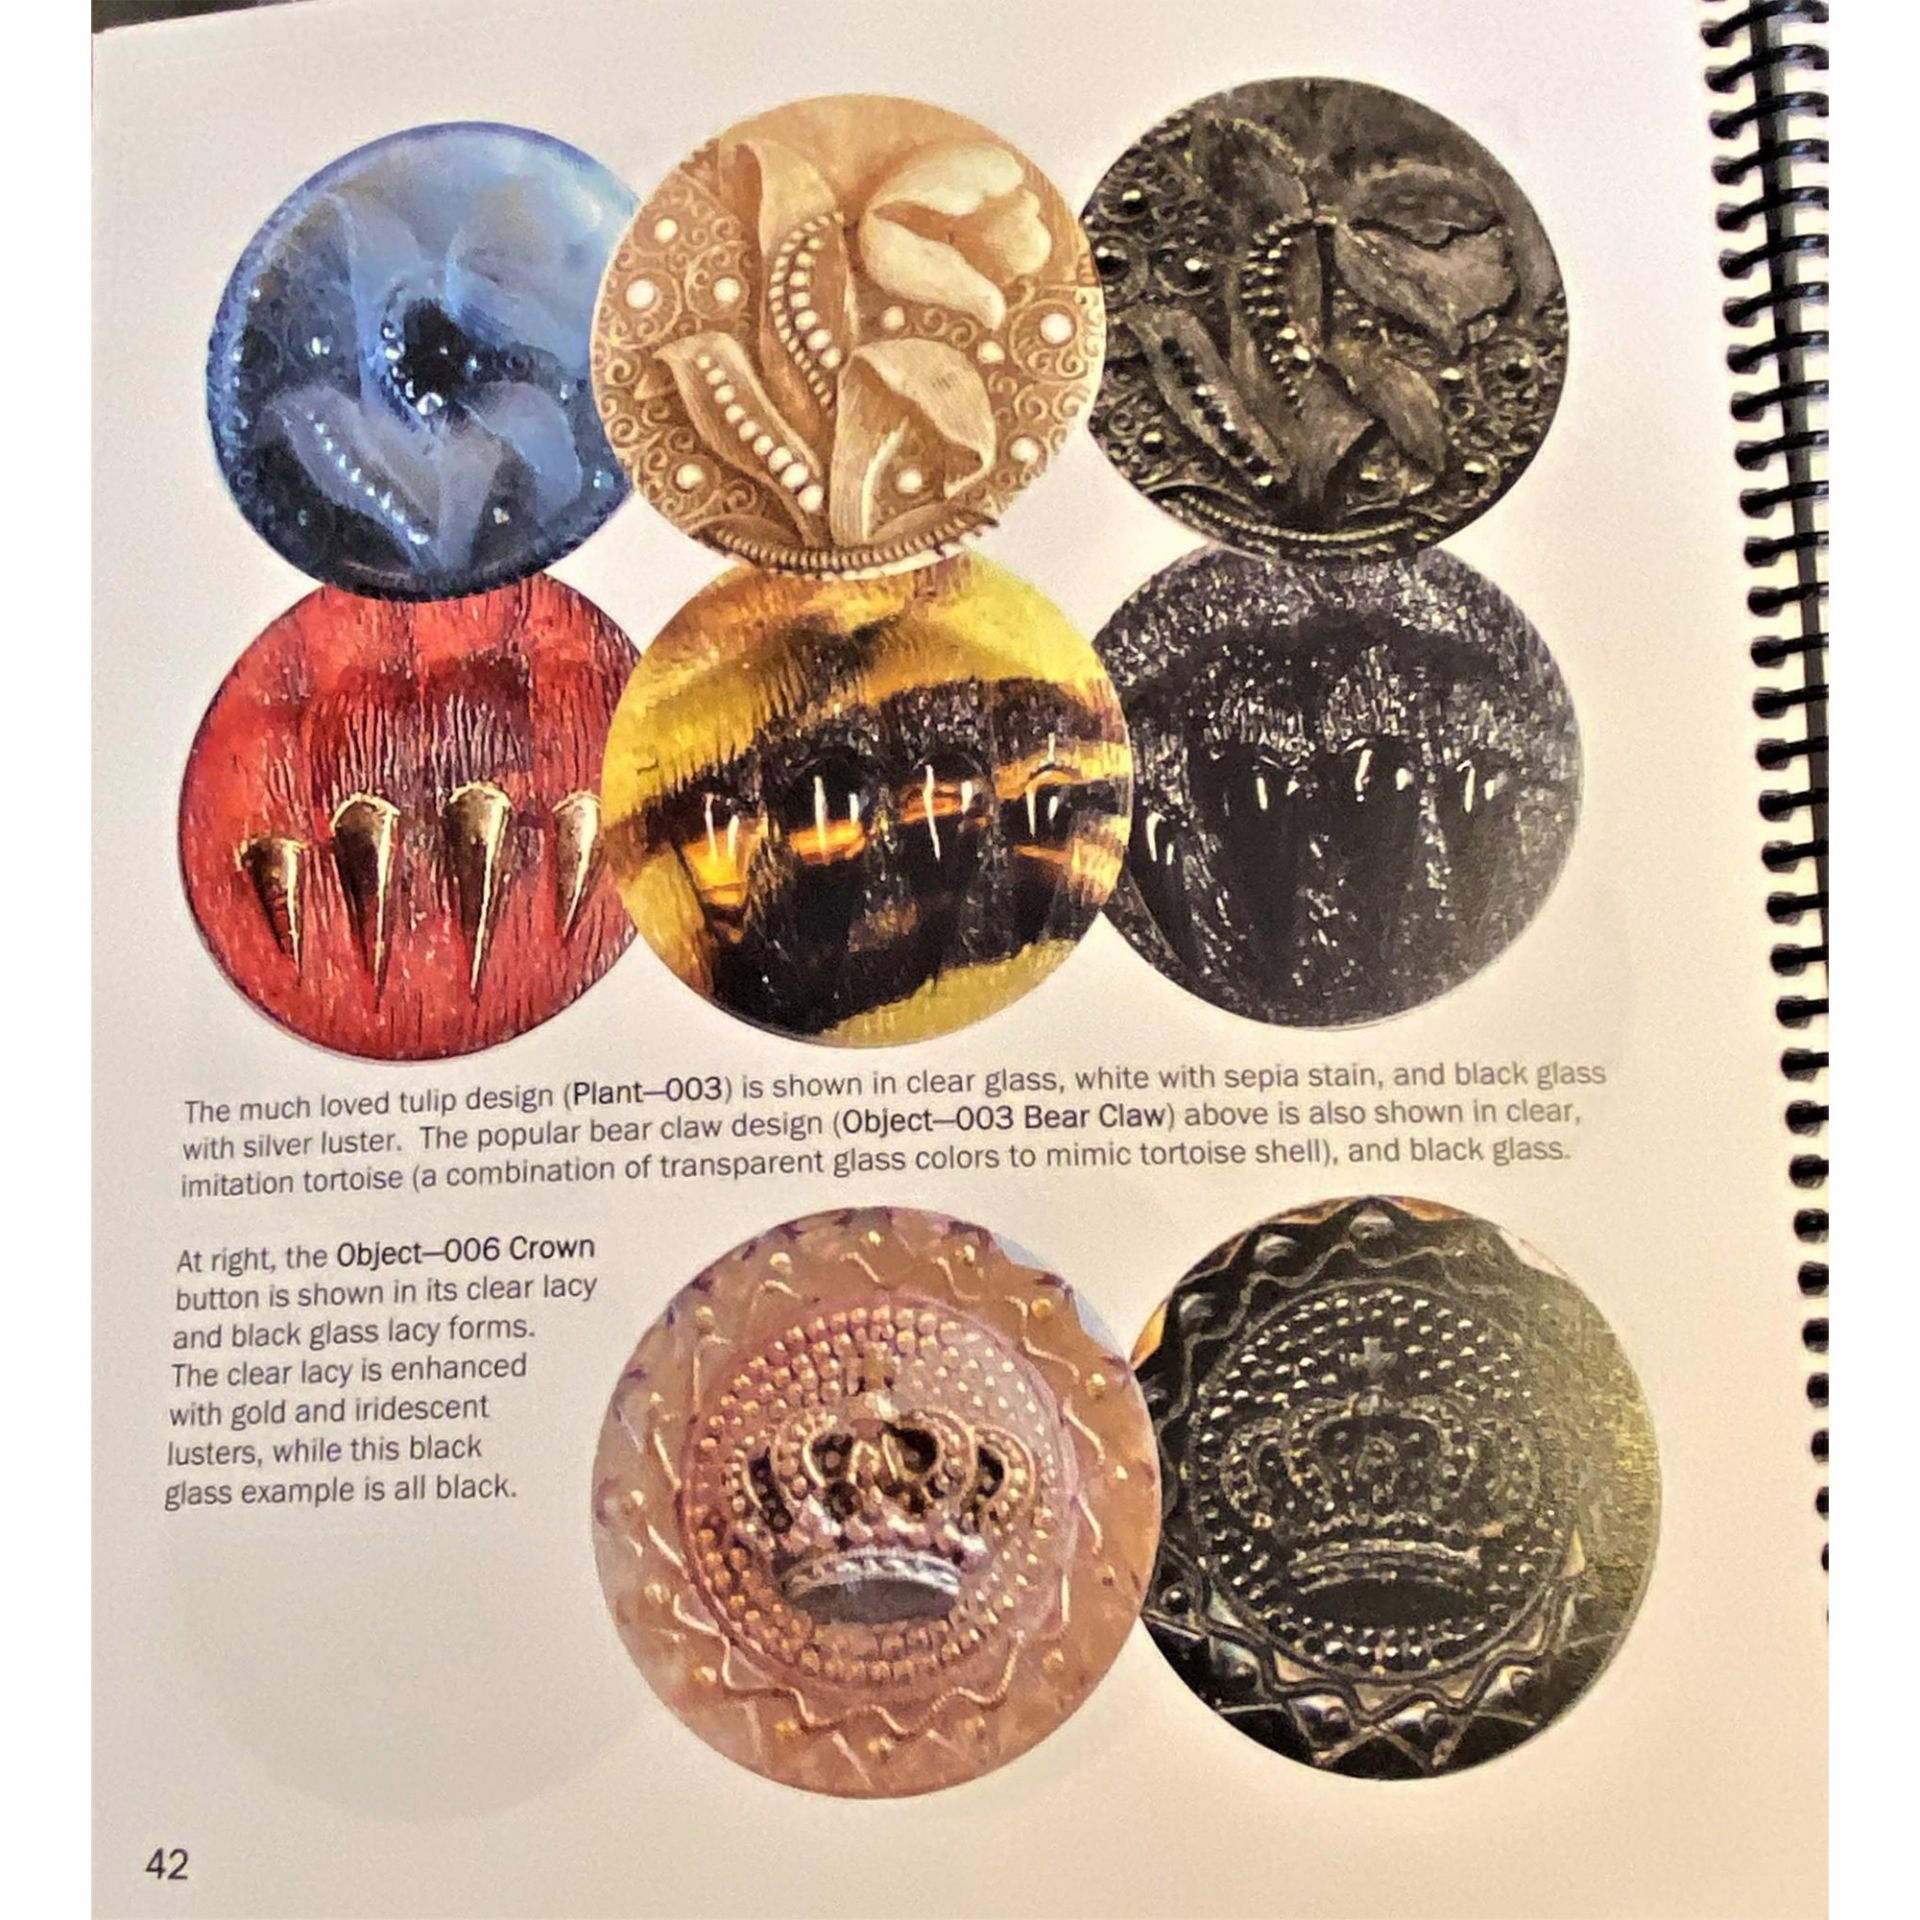 A Colorful Book On Lacy Glass Buttons - Image 4 of 4